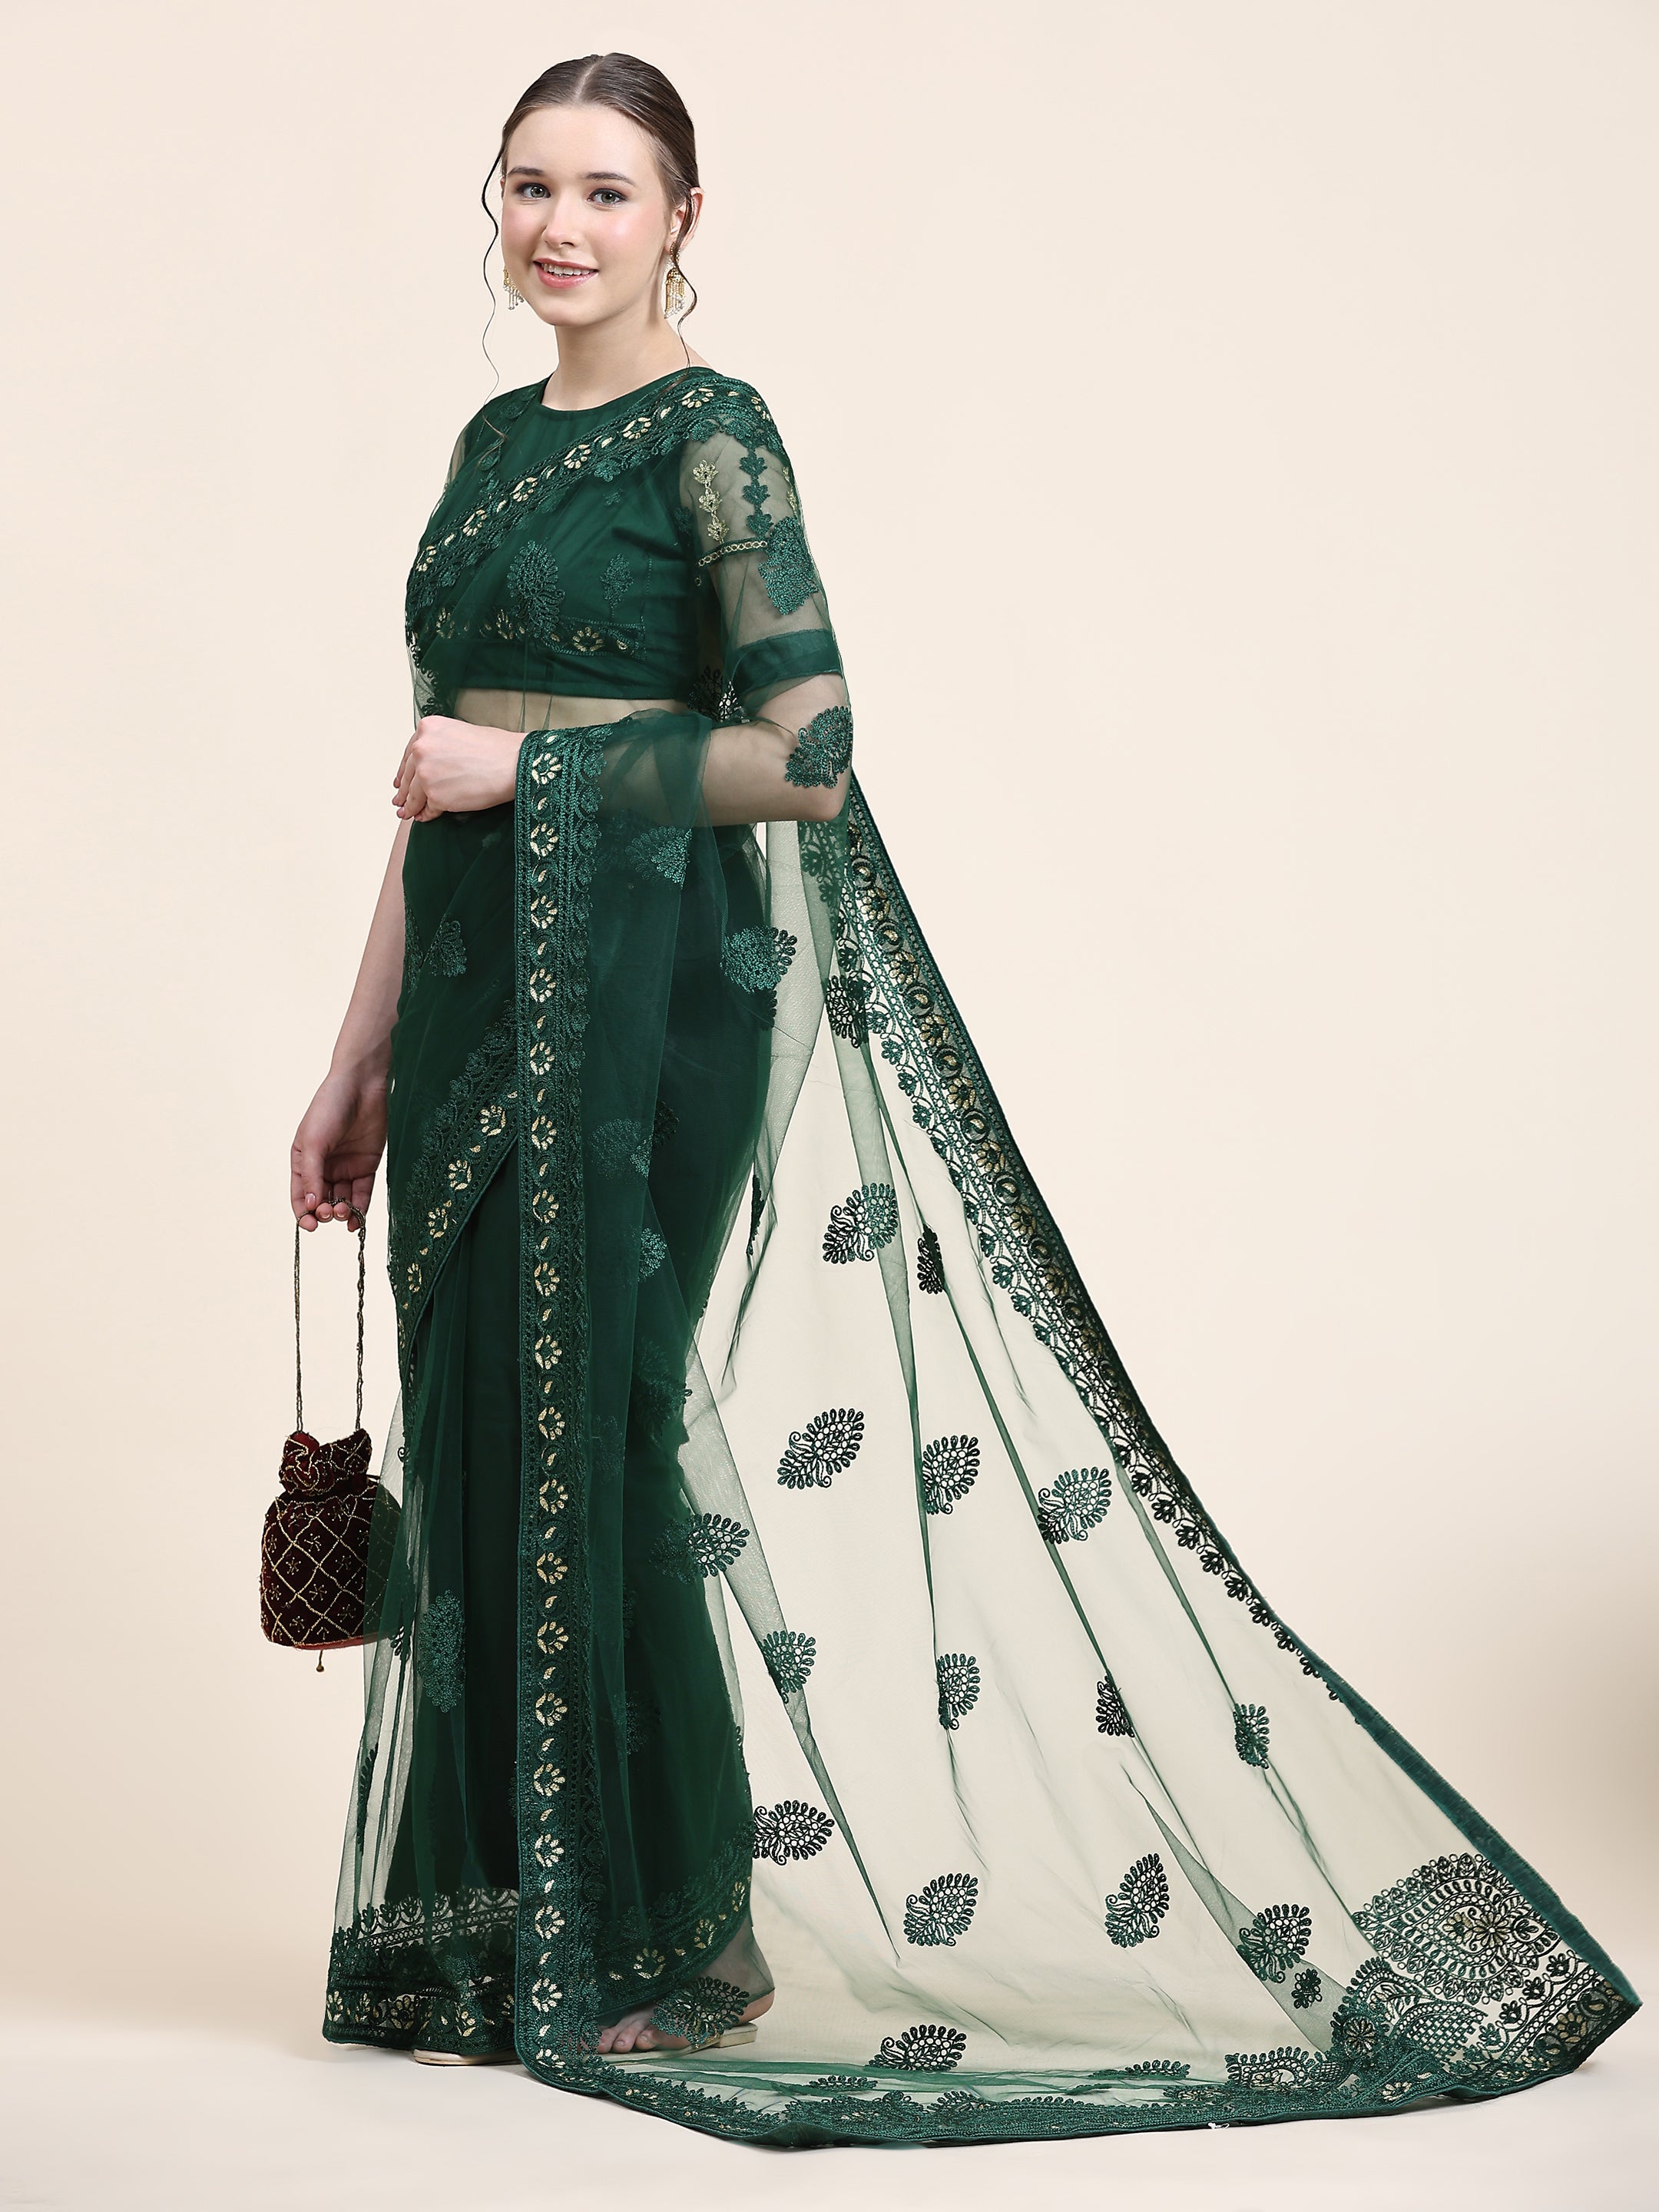 Women's Self Color Thread Embroidery Paty Wear Contemporary Net Saree With Blouse Piece (Dark Green) - NIMIDHYA